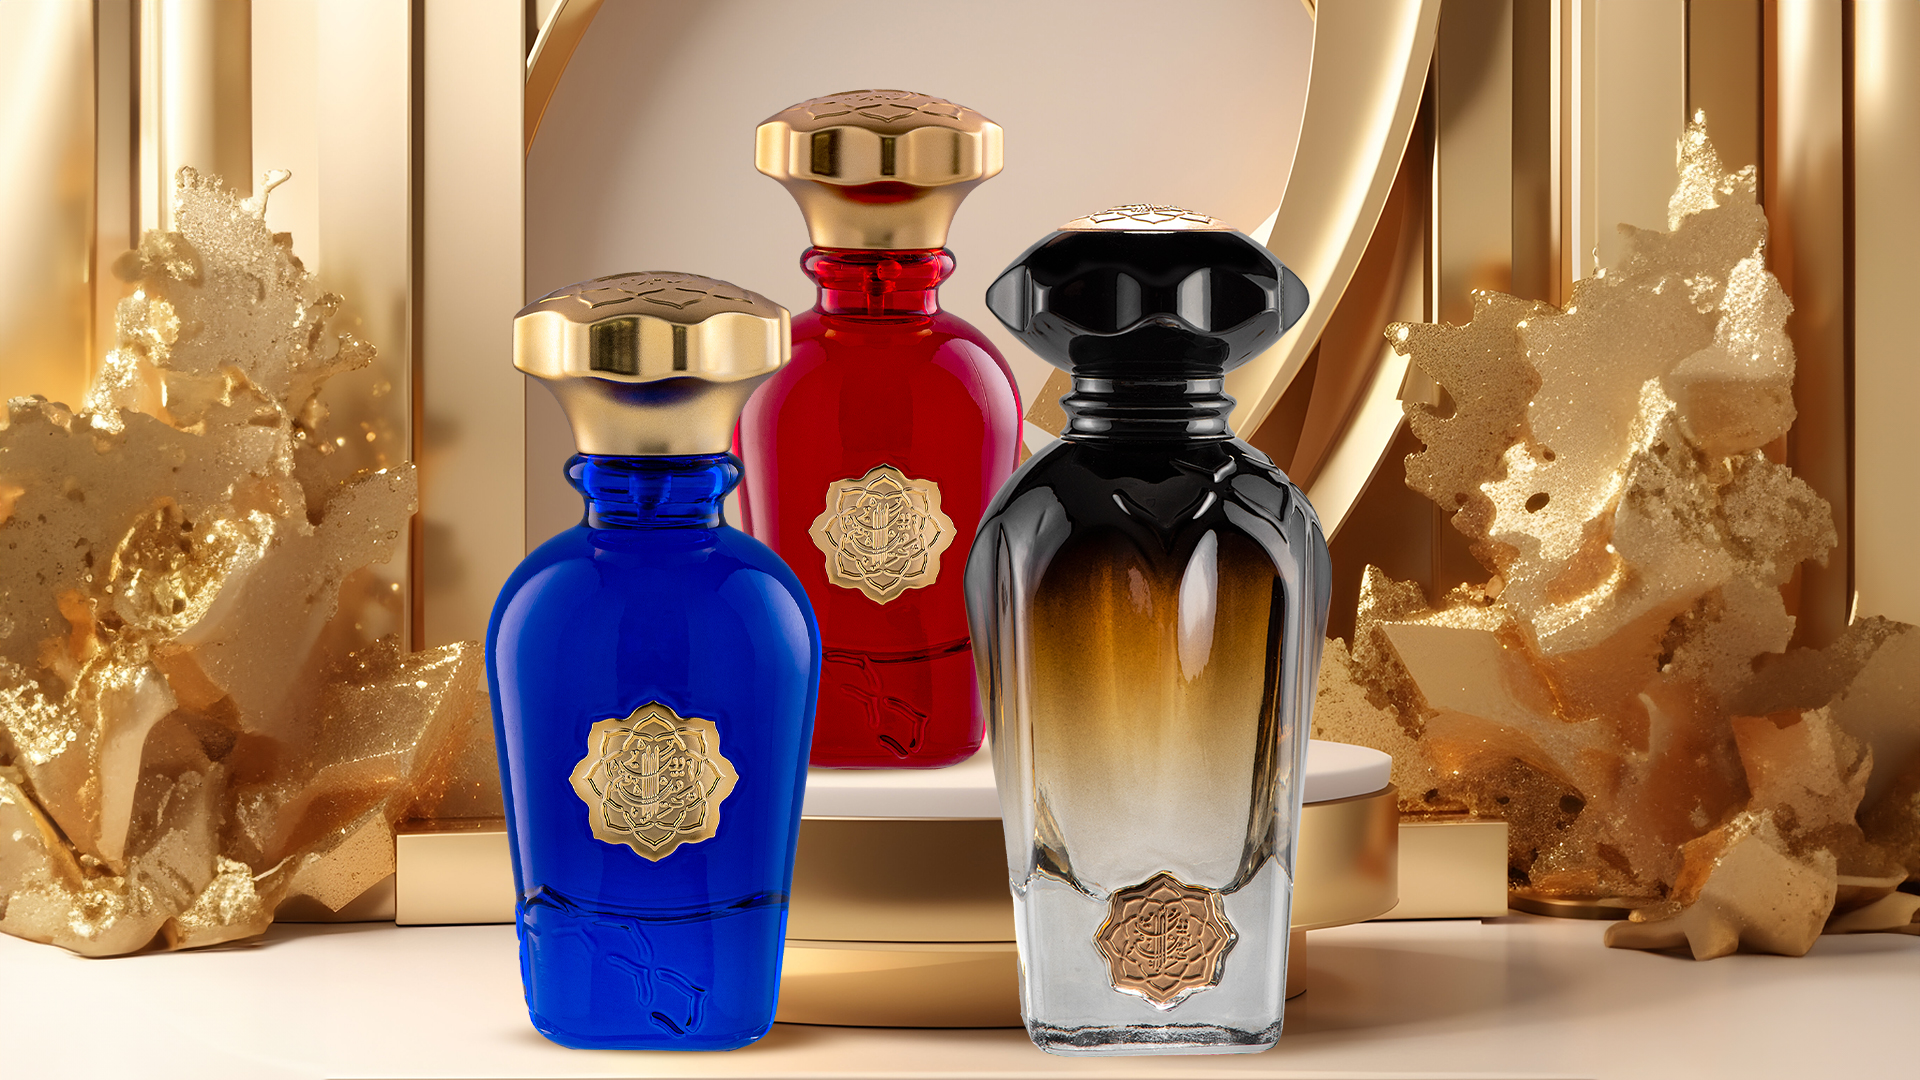 Buy Top Quality Perfumes from the Best Perfume Shop in Dubai, UAE